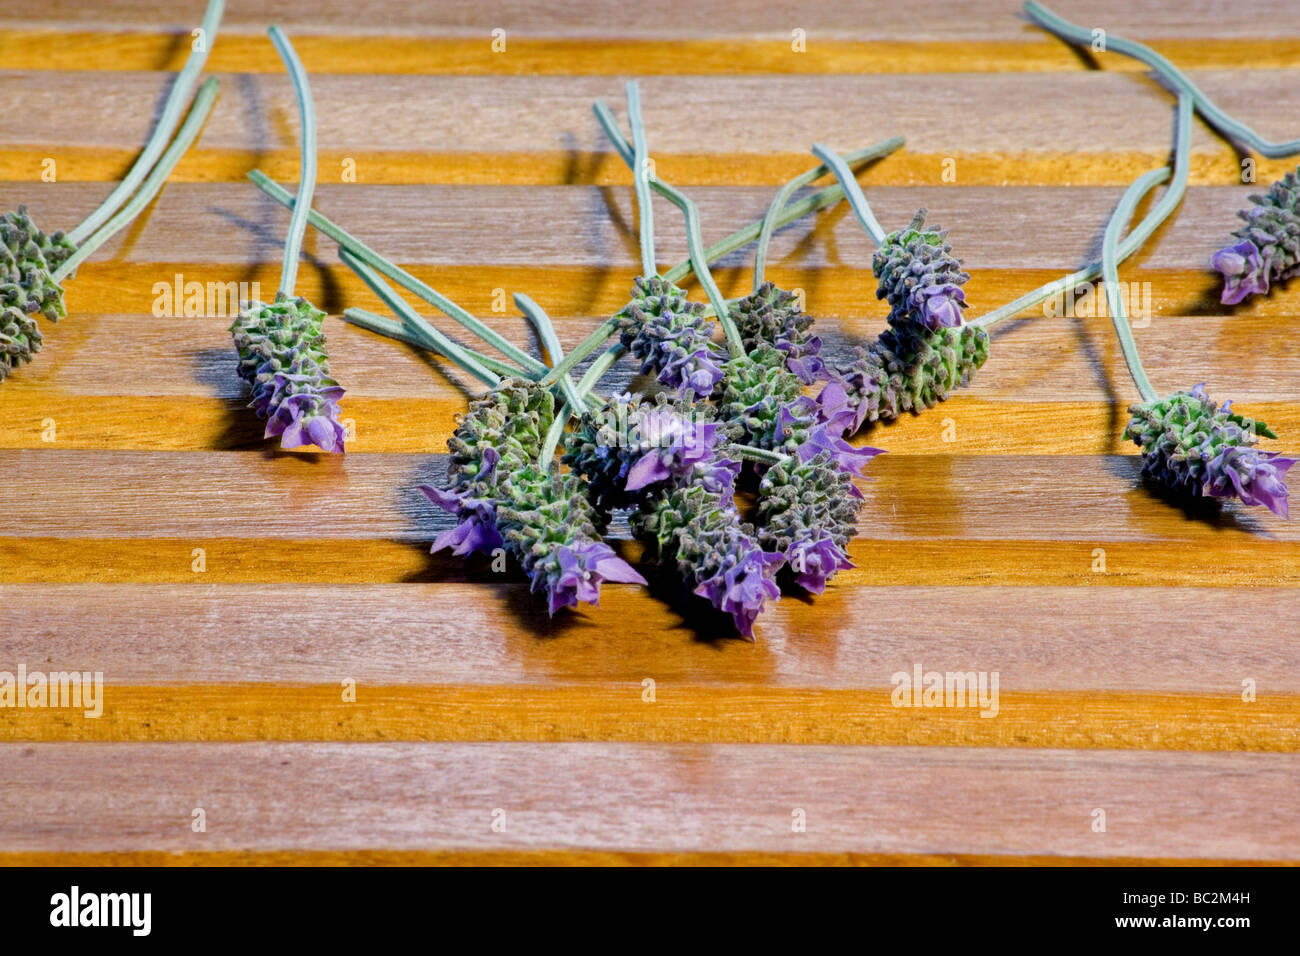 Close-up of lavender flowers on wooden deck Stock Photo